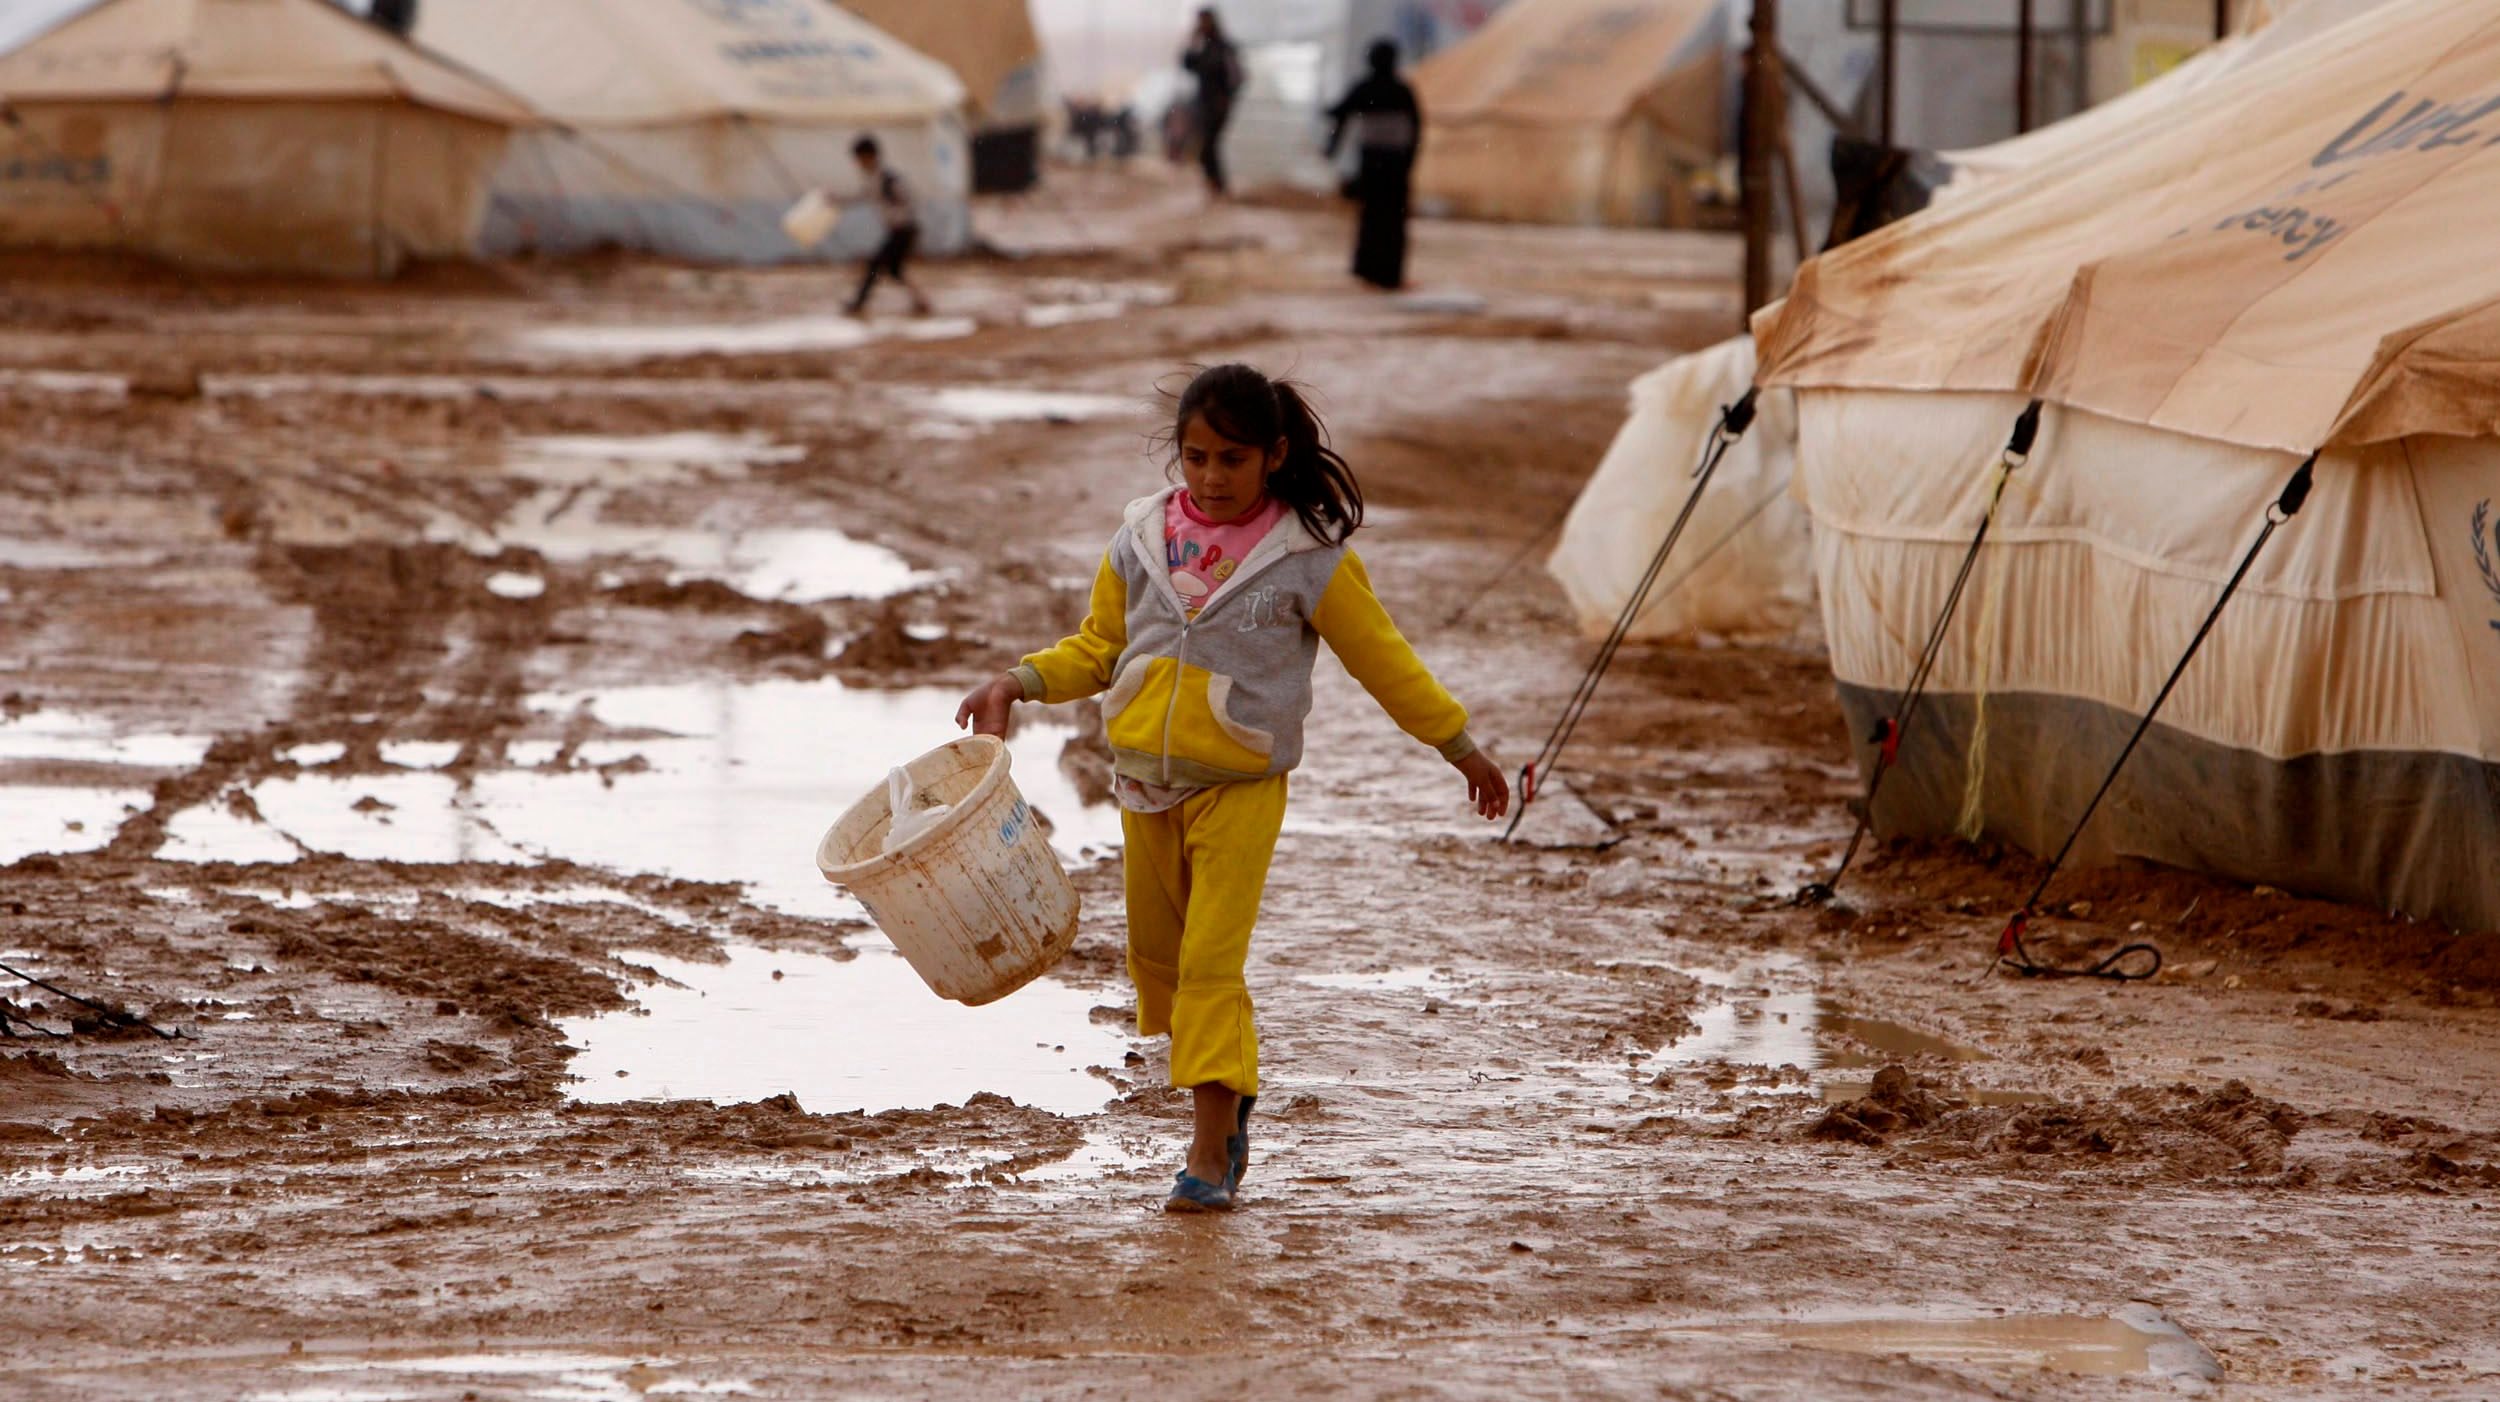 epa03528989 A Syrian refugee girl walks in mud between tents at Zattari Syrian refugee camp, near city of Mafraq, Jordan, 09 January 2013. According to media reports, riots erupted on 08 January 2013 in the Zaatari Syrian refugee camp which was pounded by heavy rains for a second day, damaging 500 tents and submerging much of the site under one meter of mud.  EPA/JAMAL NASRALLAH